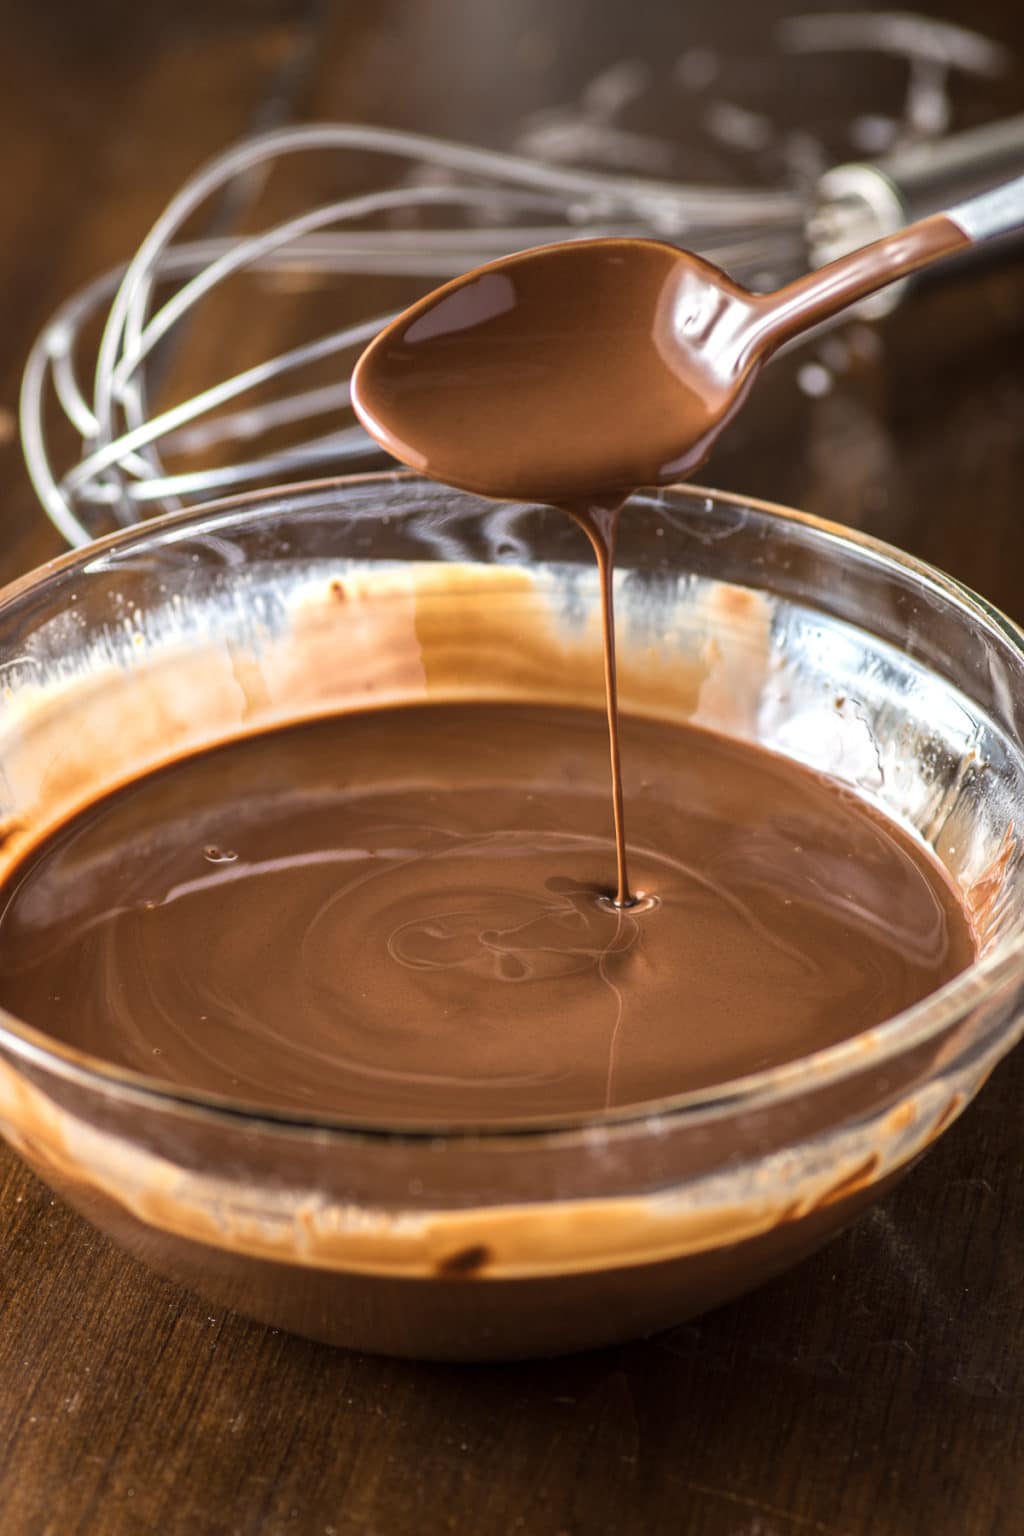 The clear glass mixing bowl is filled with molten chocolate with a teaspoon of melted chocolate held on top and dripped into the bowl. There is an egg beater in the background.